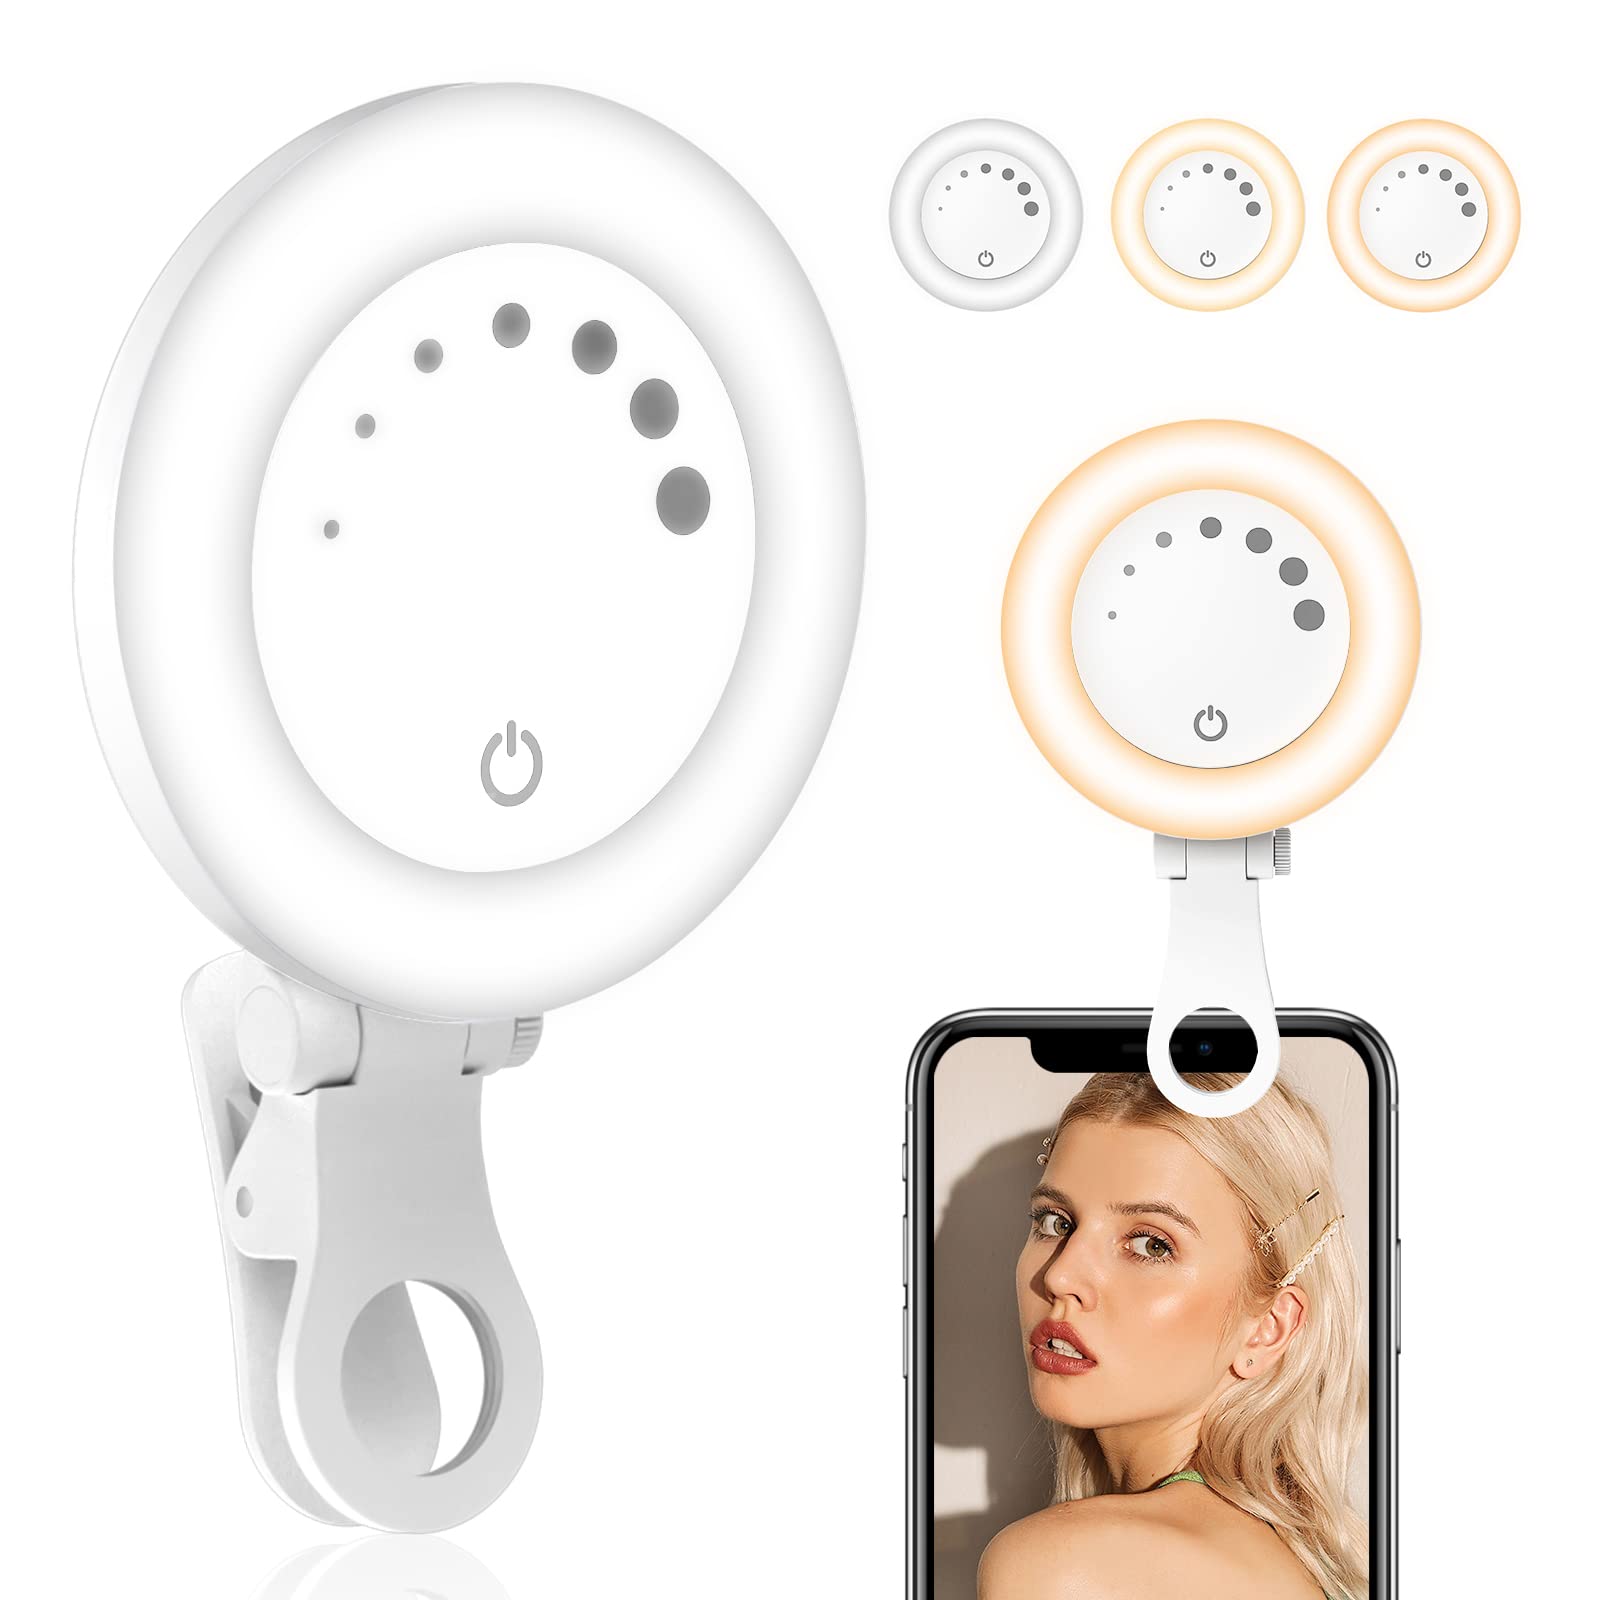 Aureday Ring Light for Phone - Selfie Light with Clip, LED Ring Light for iPhone, Portable Phone Light for Selfies, Video Recording, Makeup, Compatible with Cell Phone, Laptop, Tablet